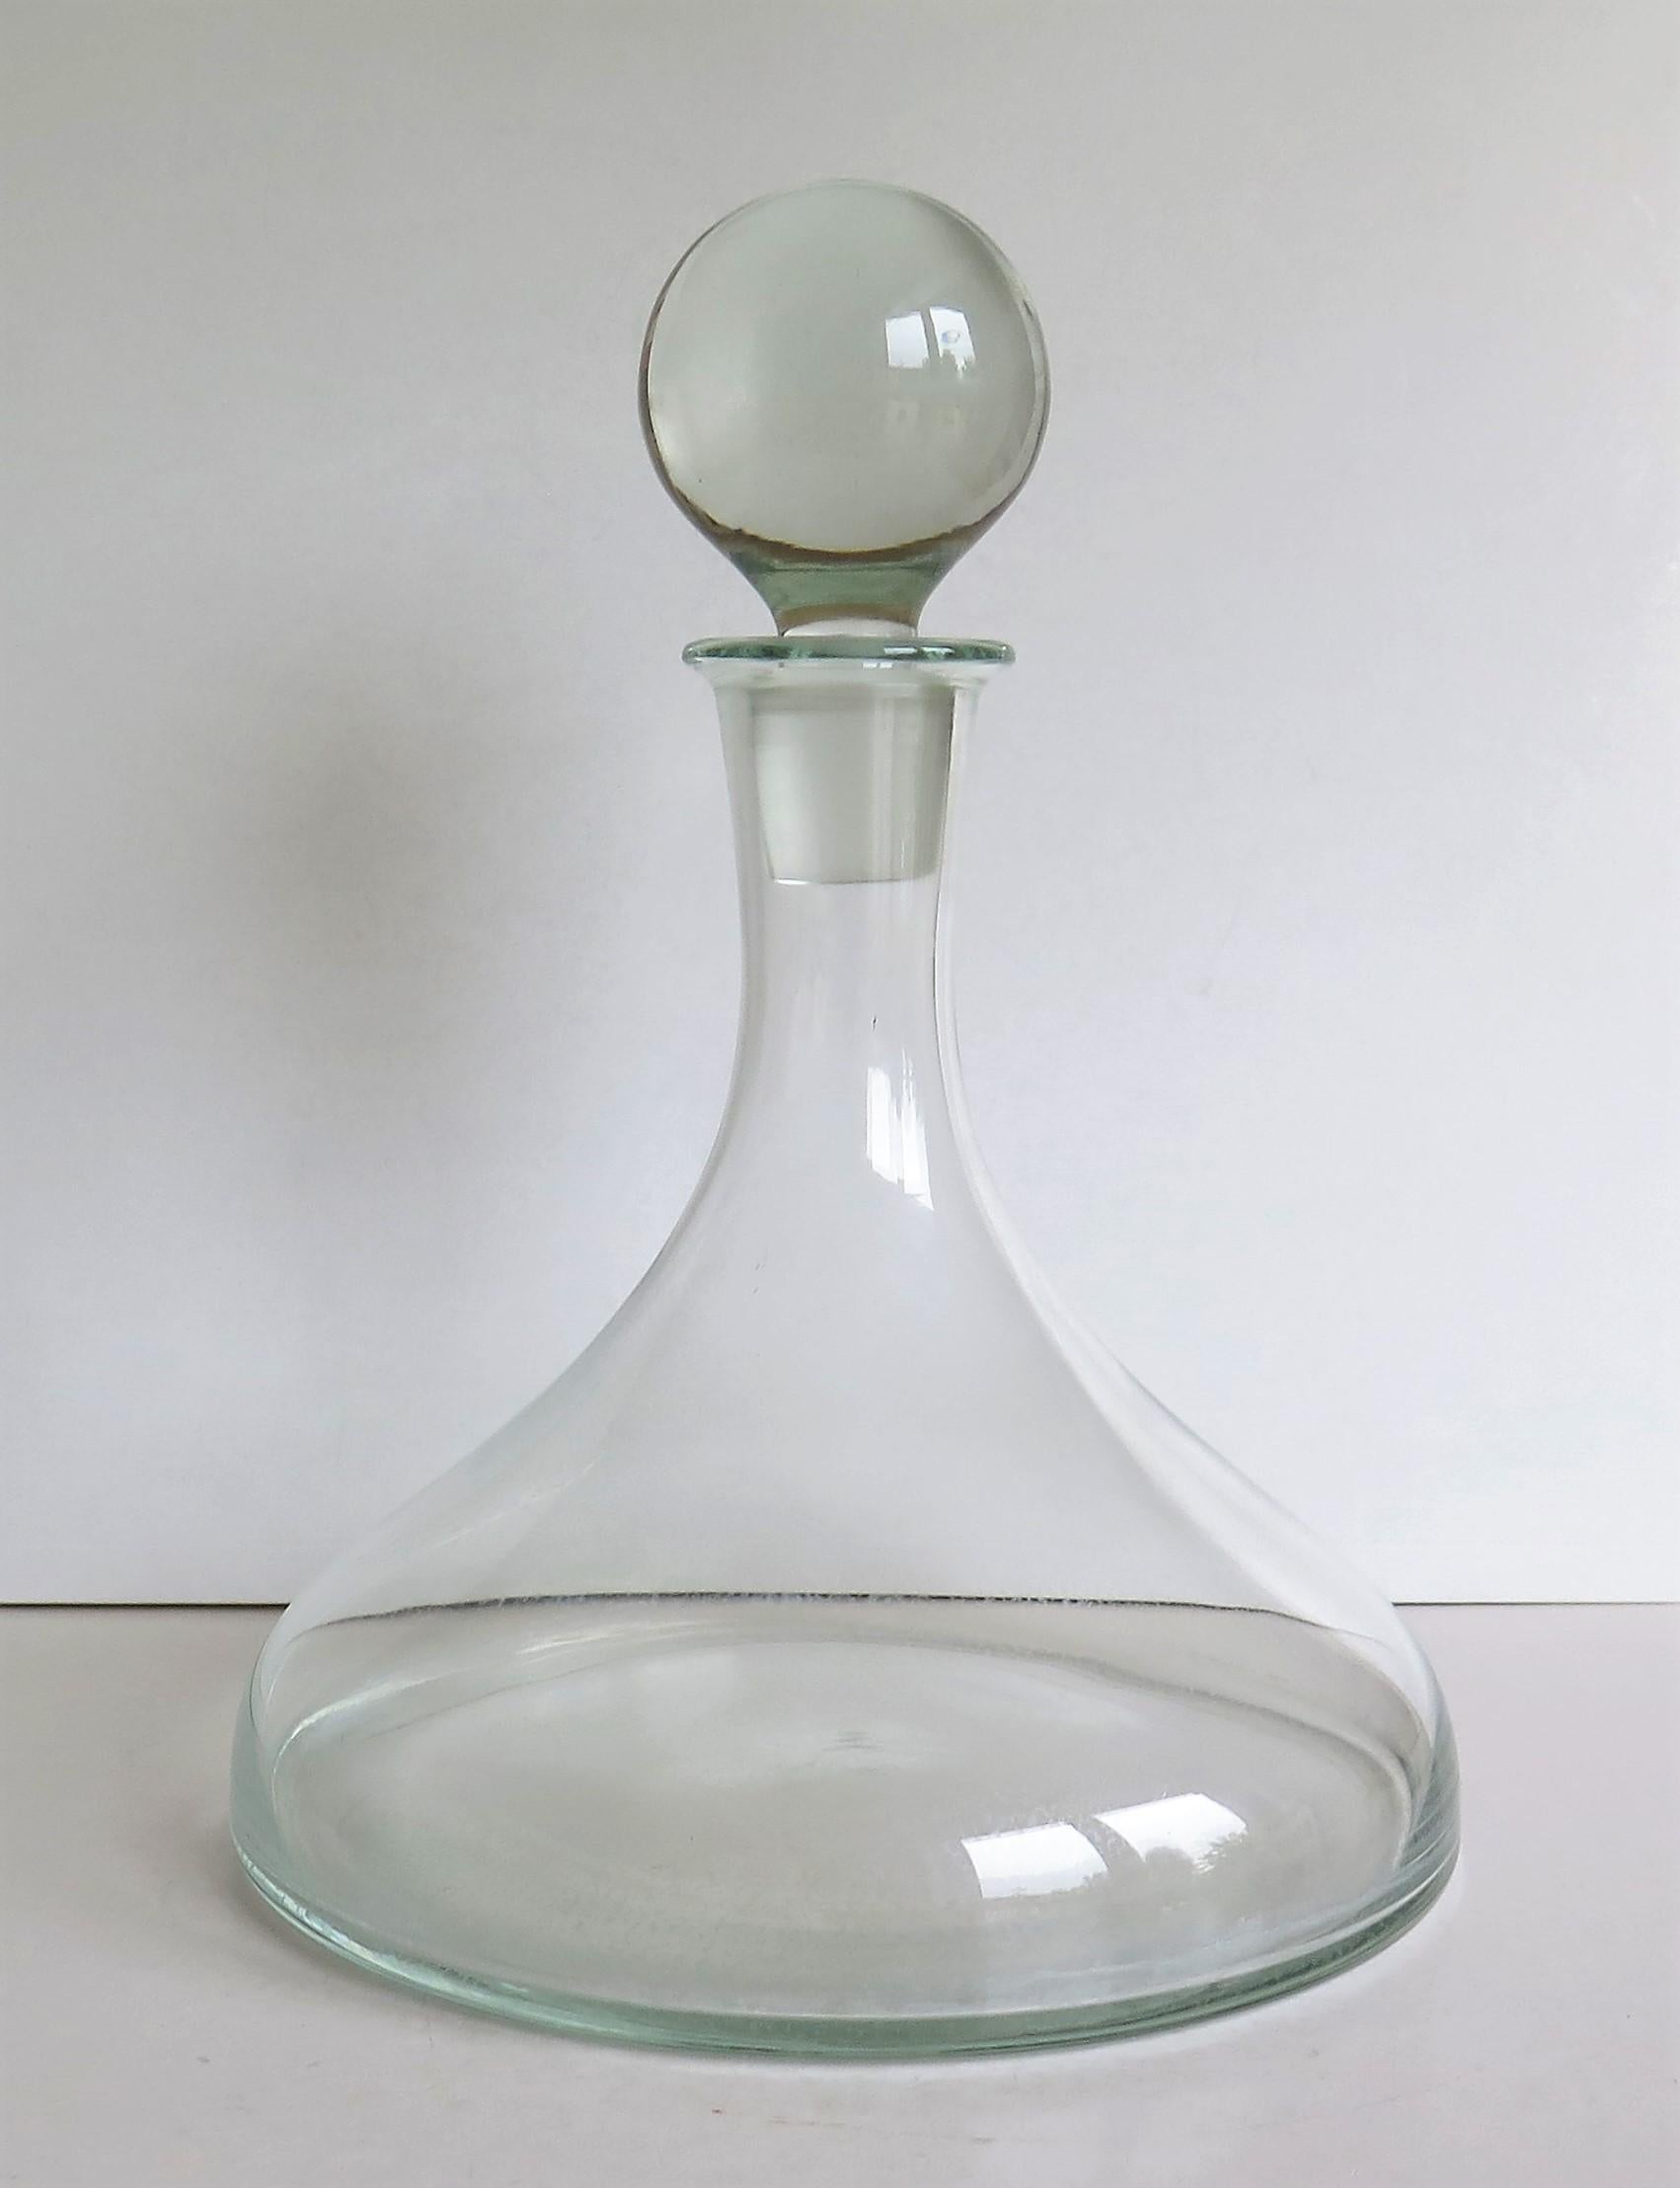 This is a ship's glass decanter with a wide base made from heavy lead glass having a soft light grey color with a globe stopper and with a fluid capacity of about 1.25 litres, all dating to circa 1920.

Most of these ship's glass decanters are